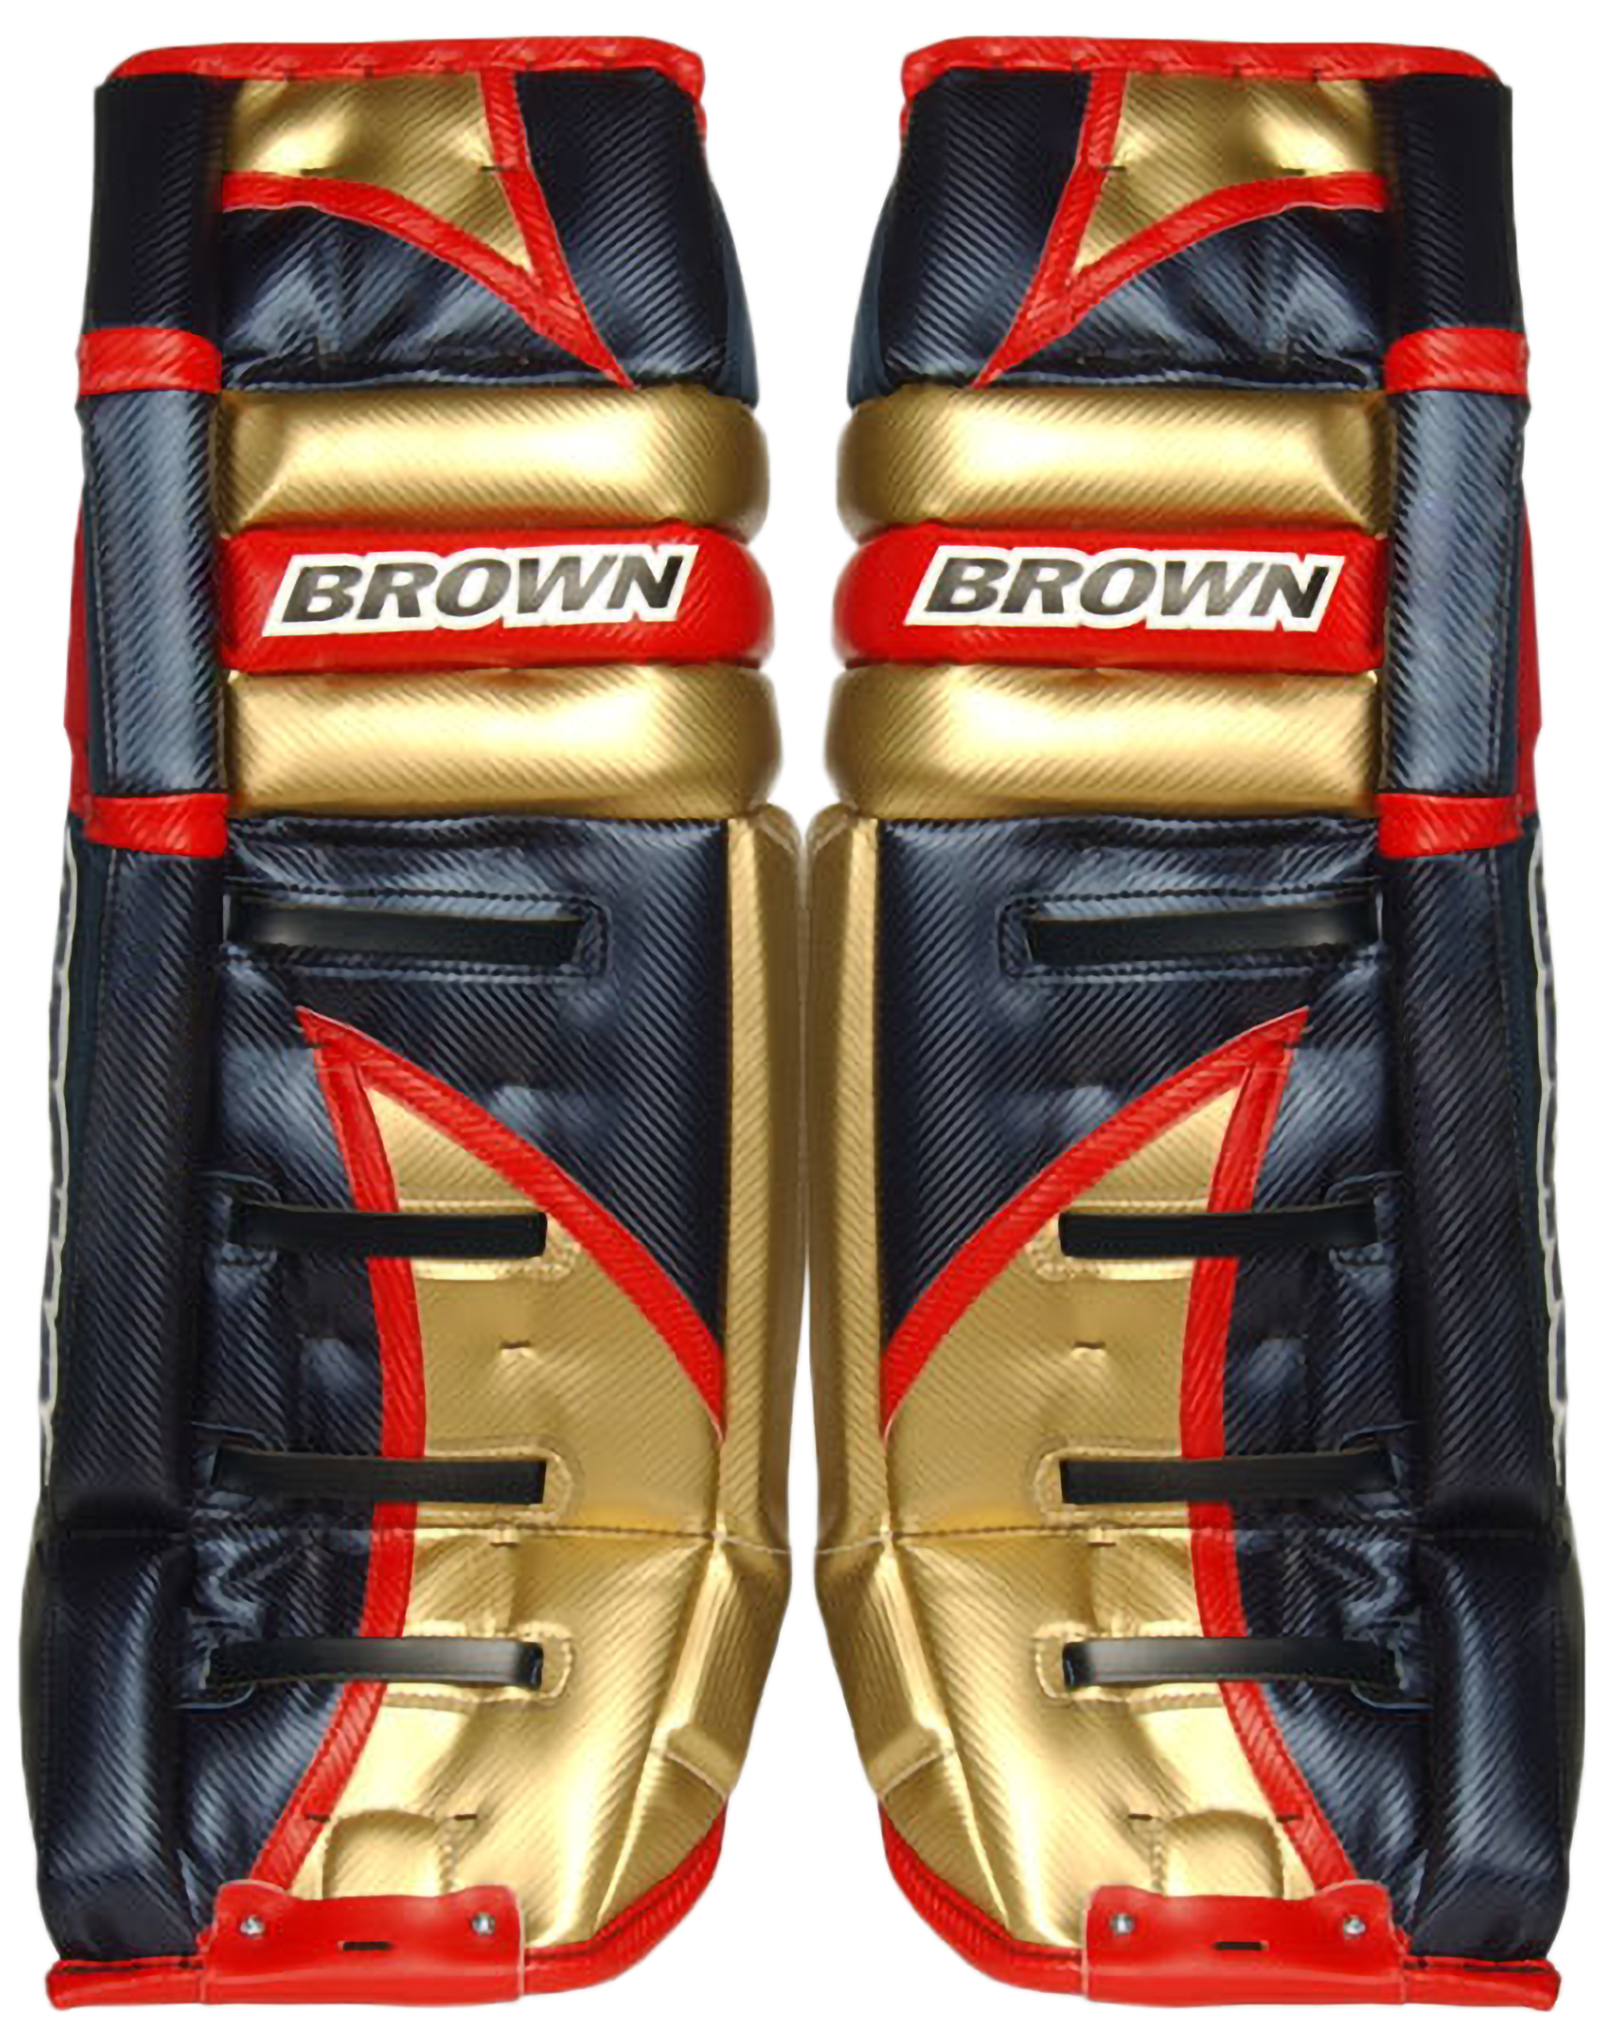 Front of 2100 leg pads